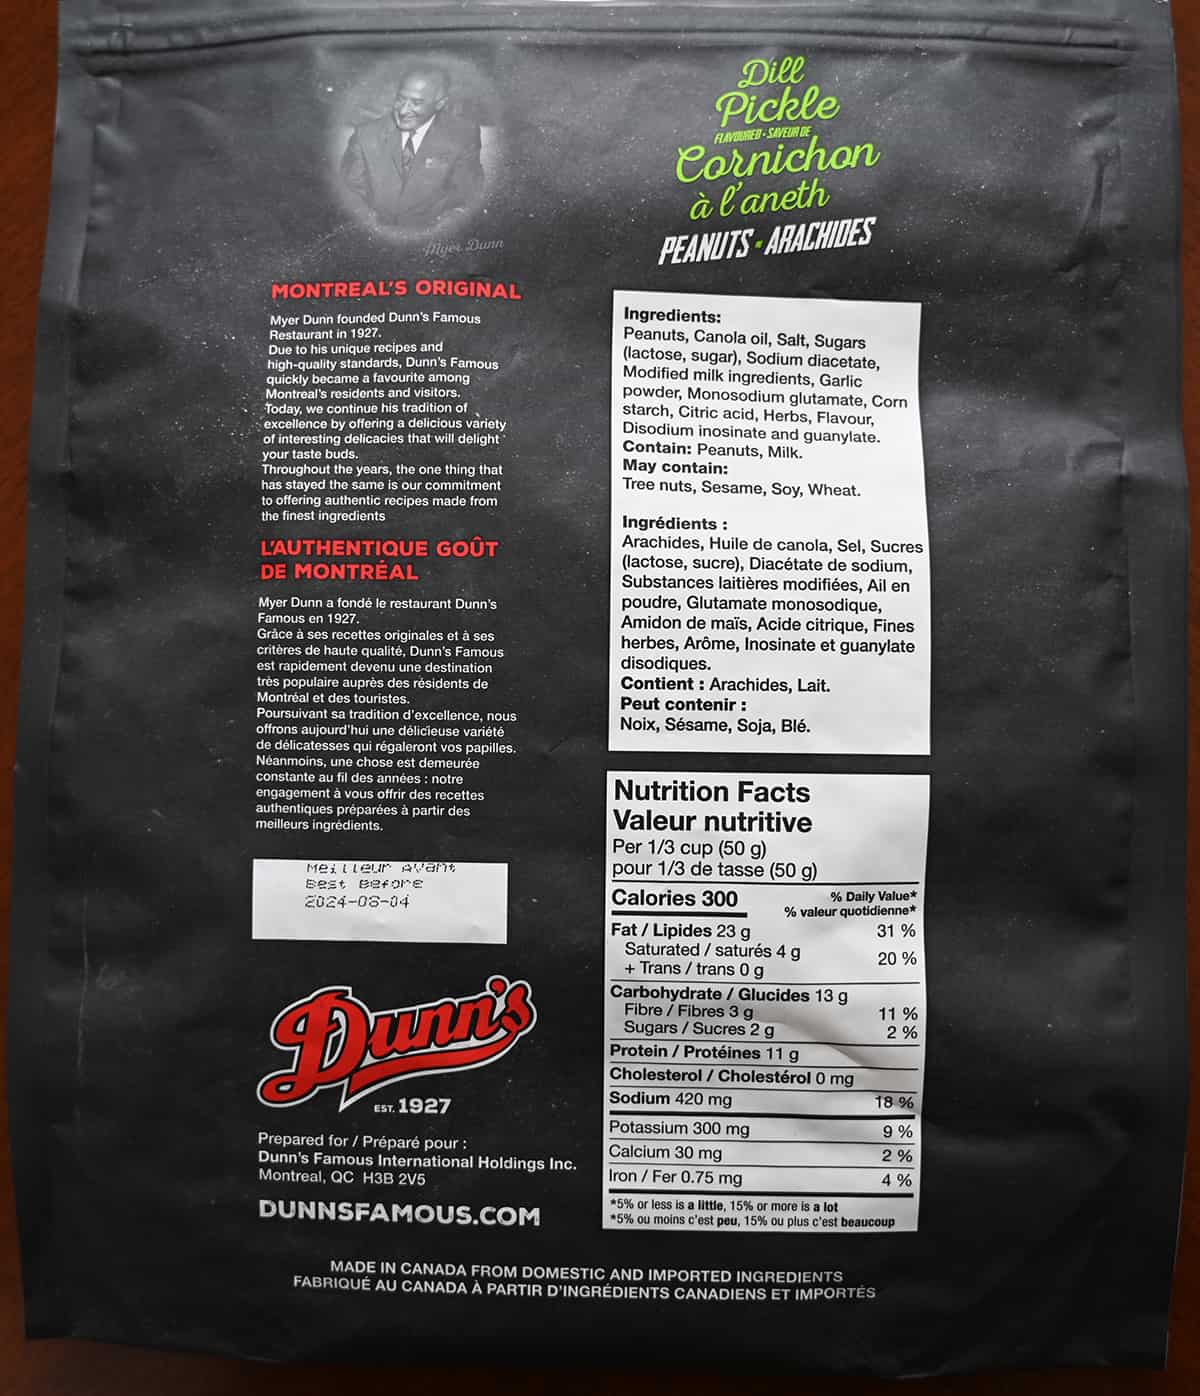 Image of the back of the bag of peanuts showing ingredients, nutrition facts,, best before date and company description.